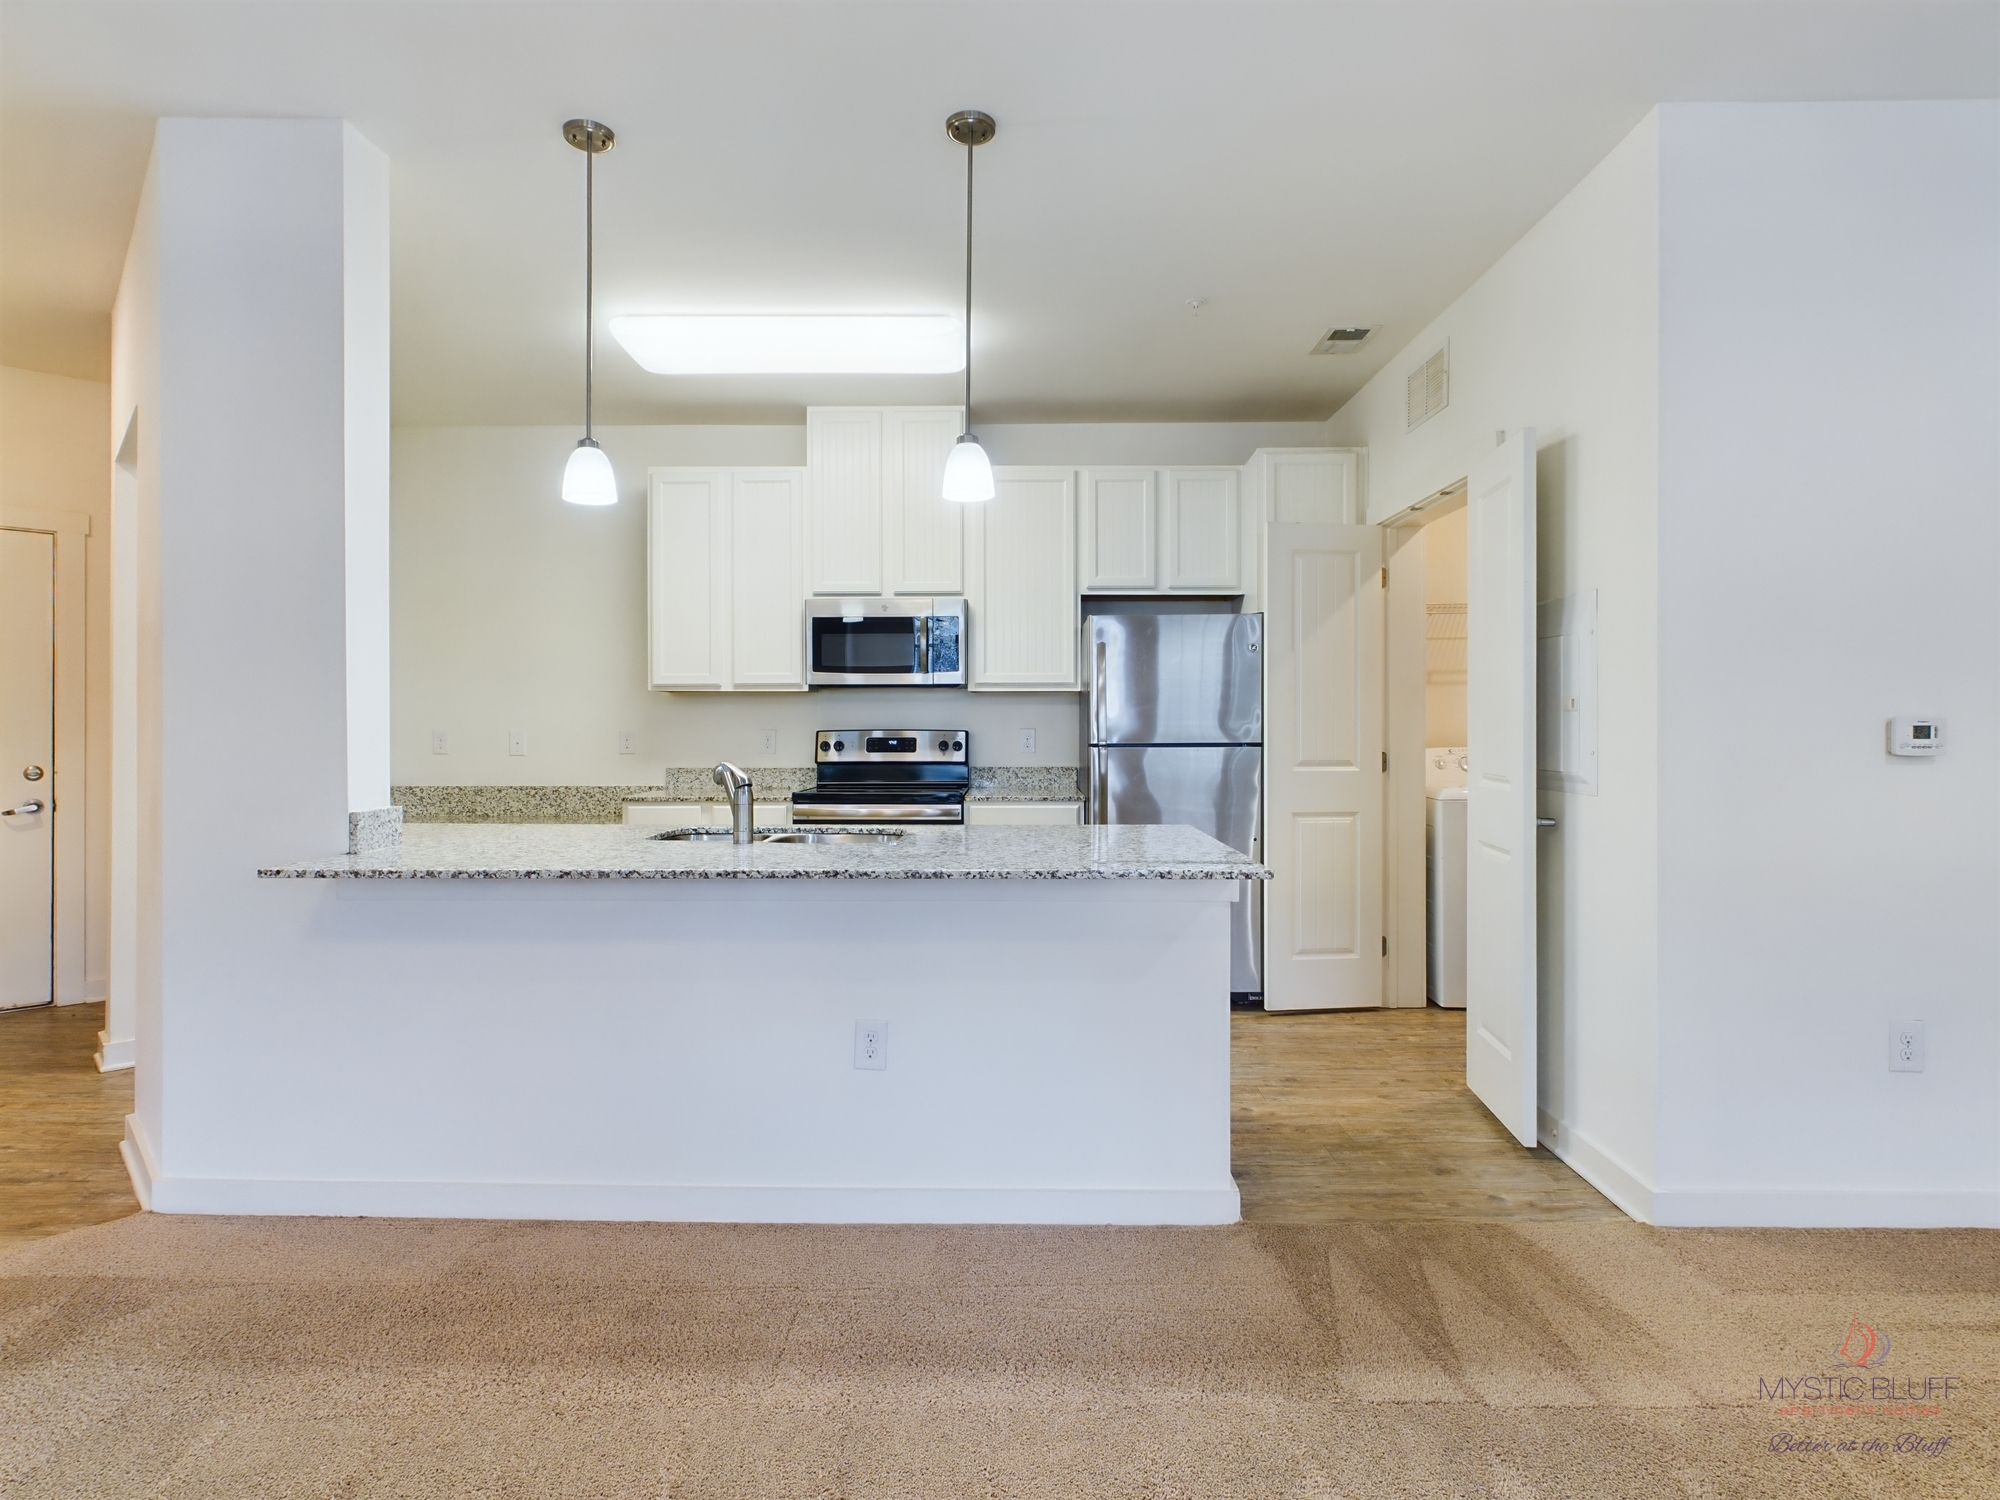 An empty kitchen in apartments with white cabinets and stainless steel appliances.